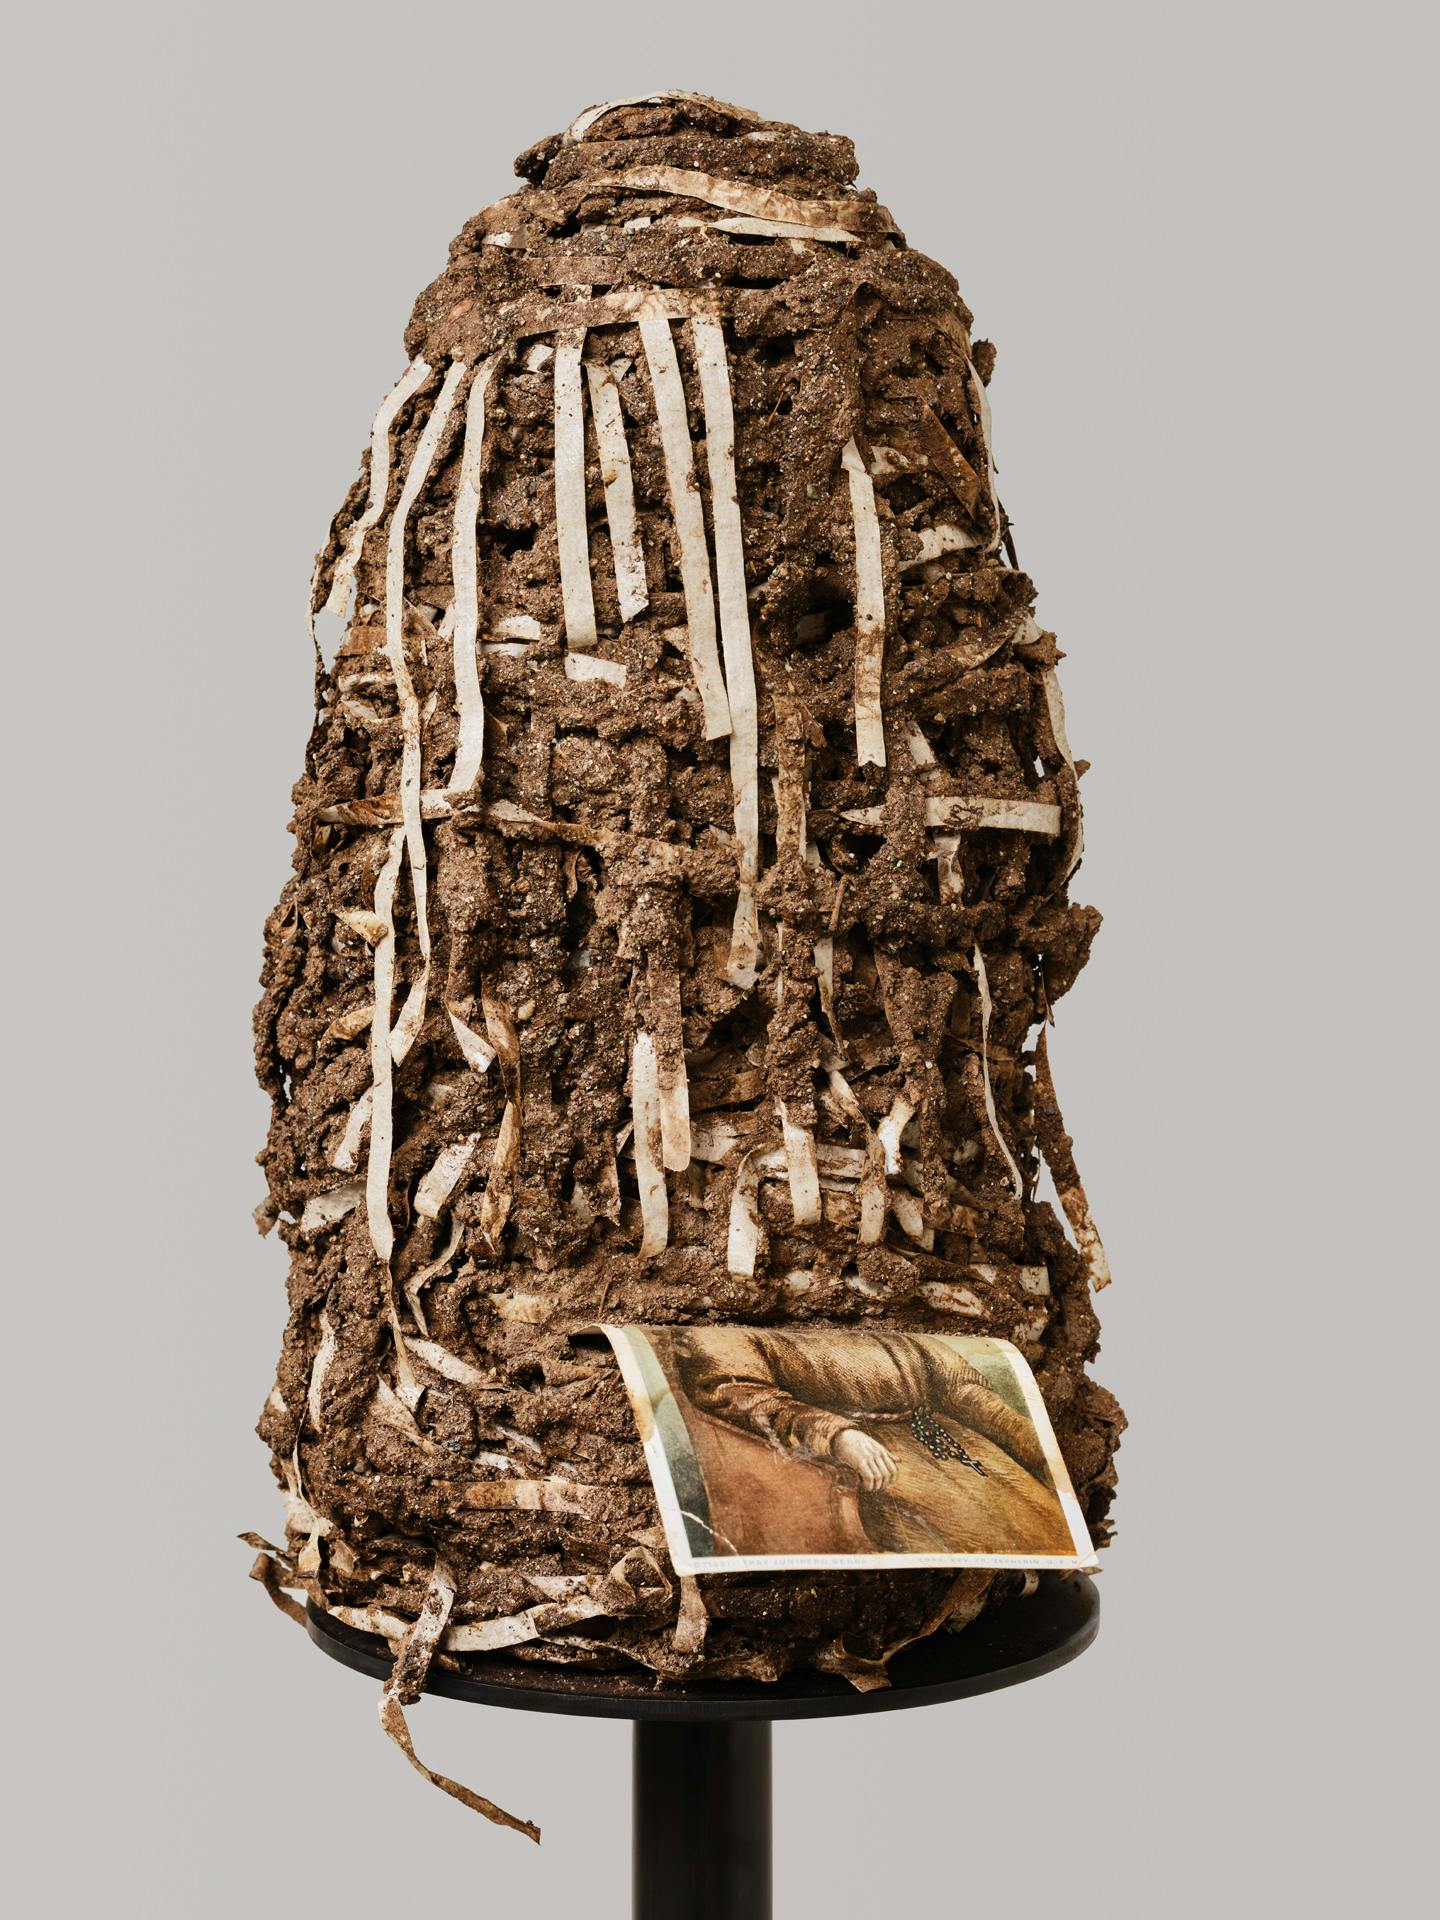 A mound-like sculpture made from layers of adobe mud and strips of tape. A postcard with an image of a figure dressed in a religious habit is wedged into the mound, leaving only the torso visible.